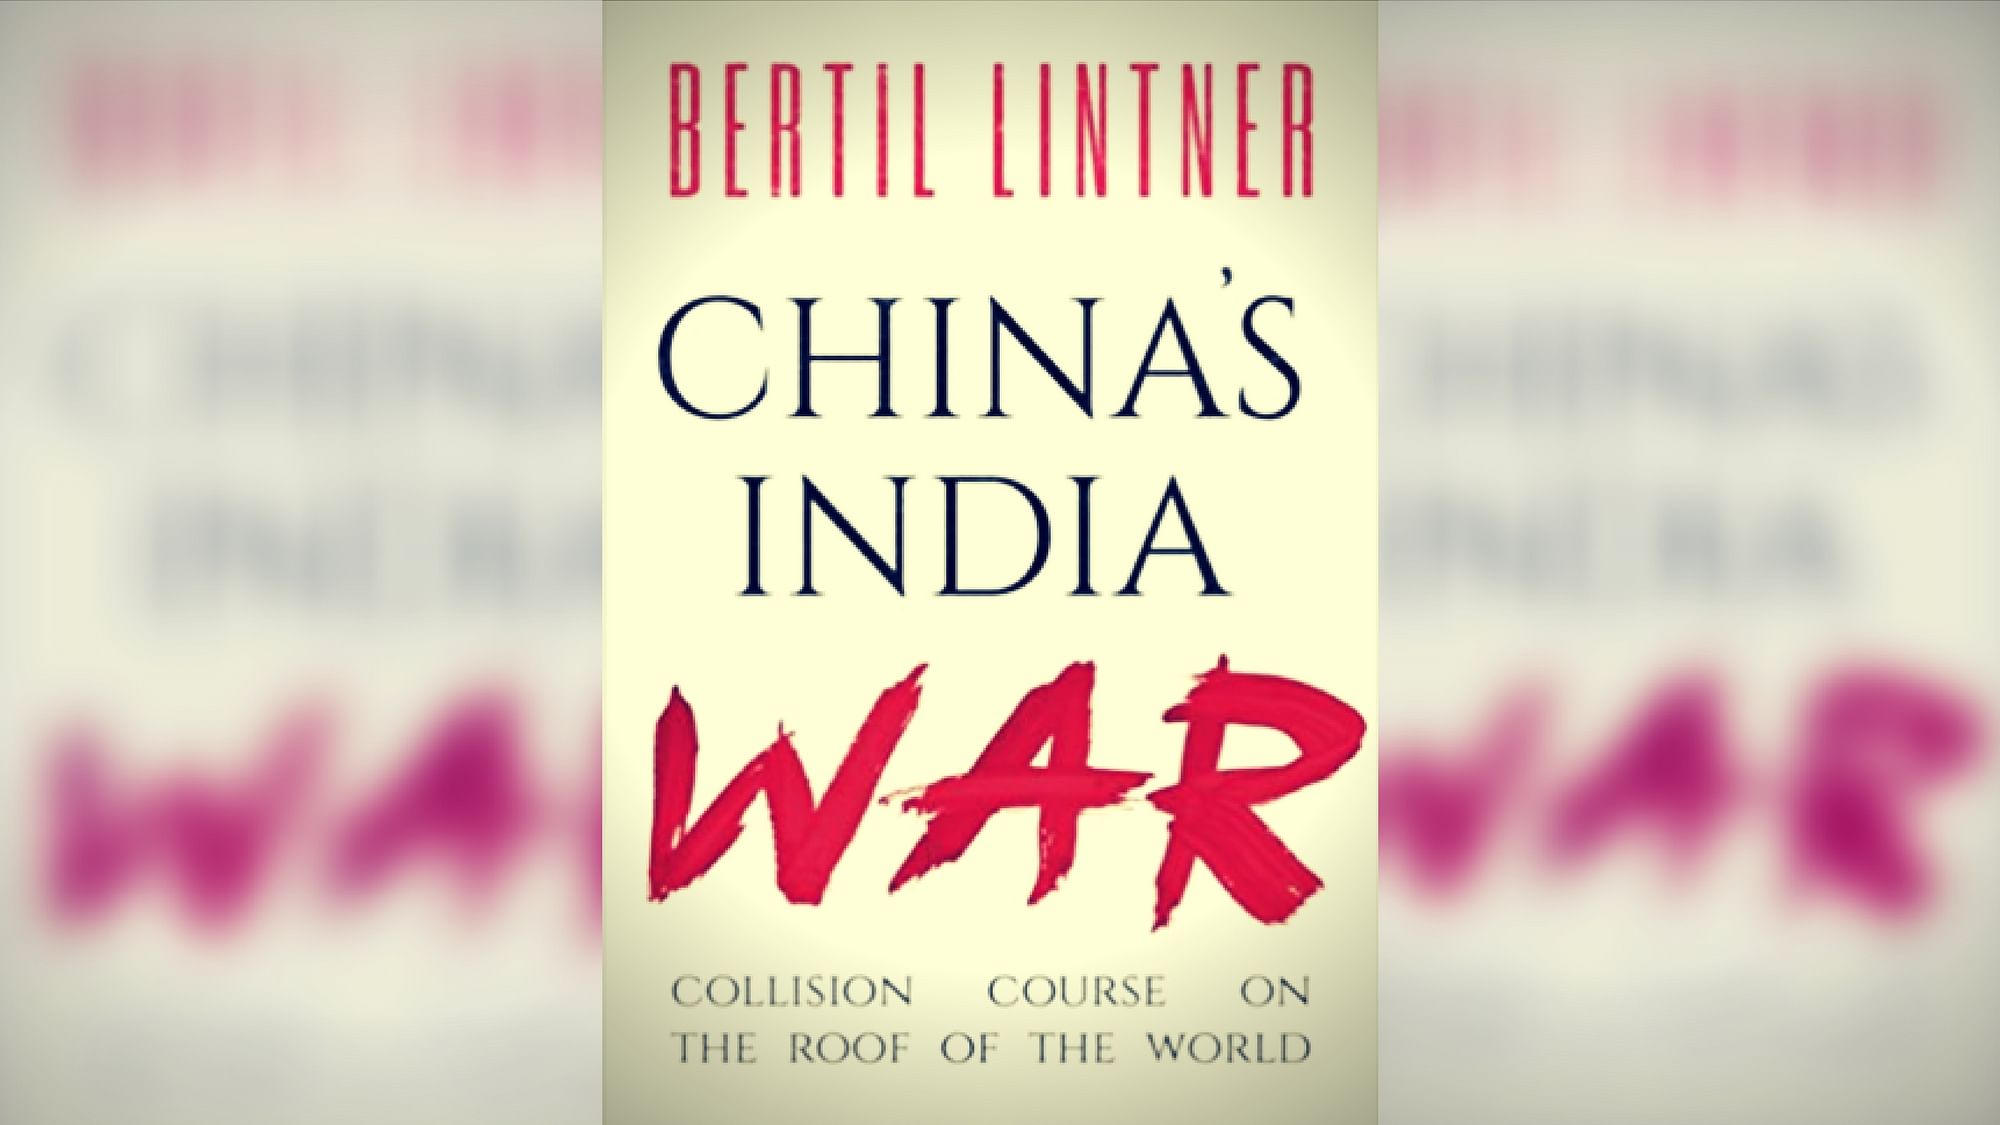 Bertil Lintner’s <i>China’s India War</i> argues that China began planning the war as early as 1959.